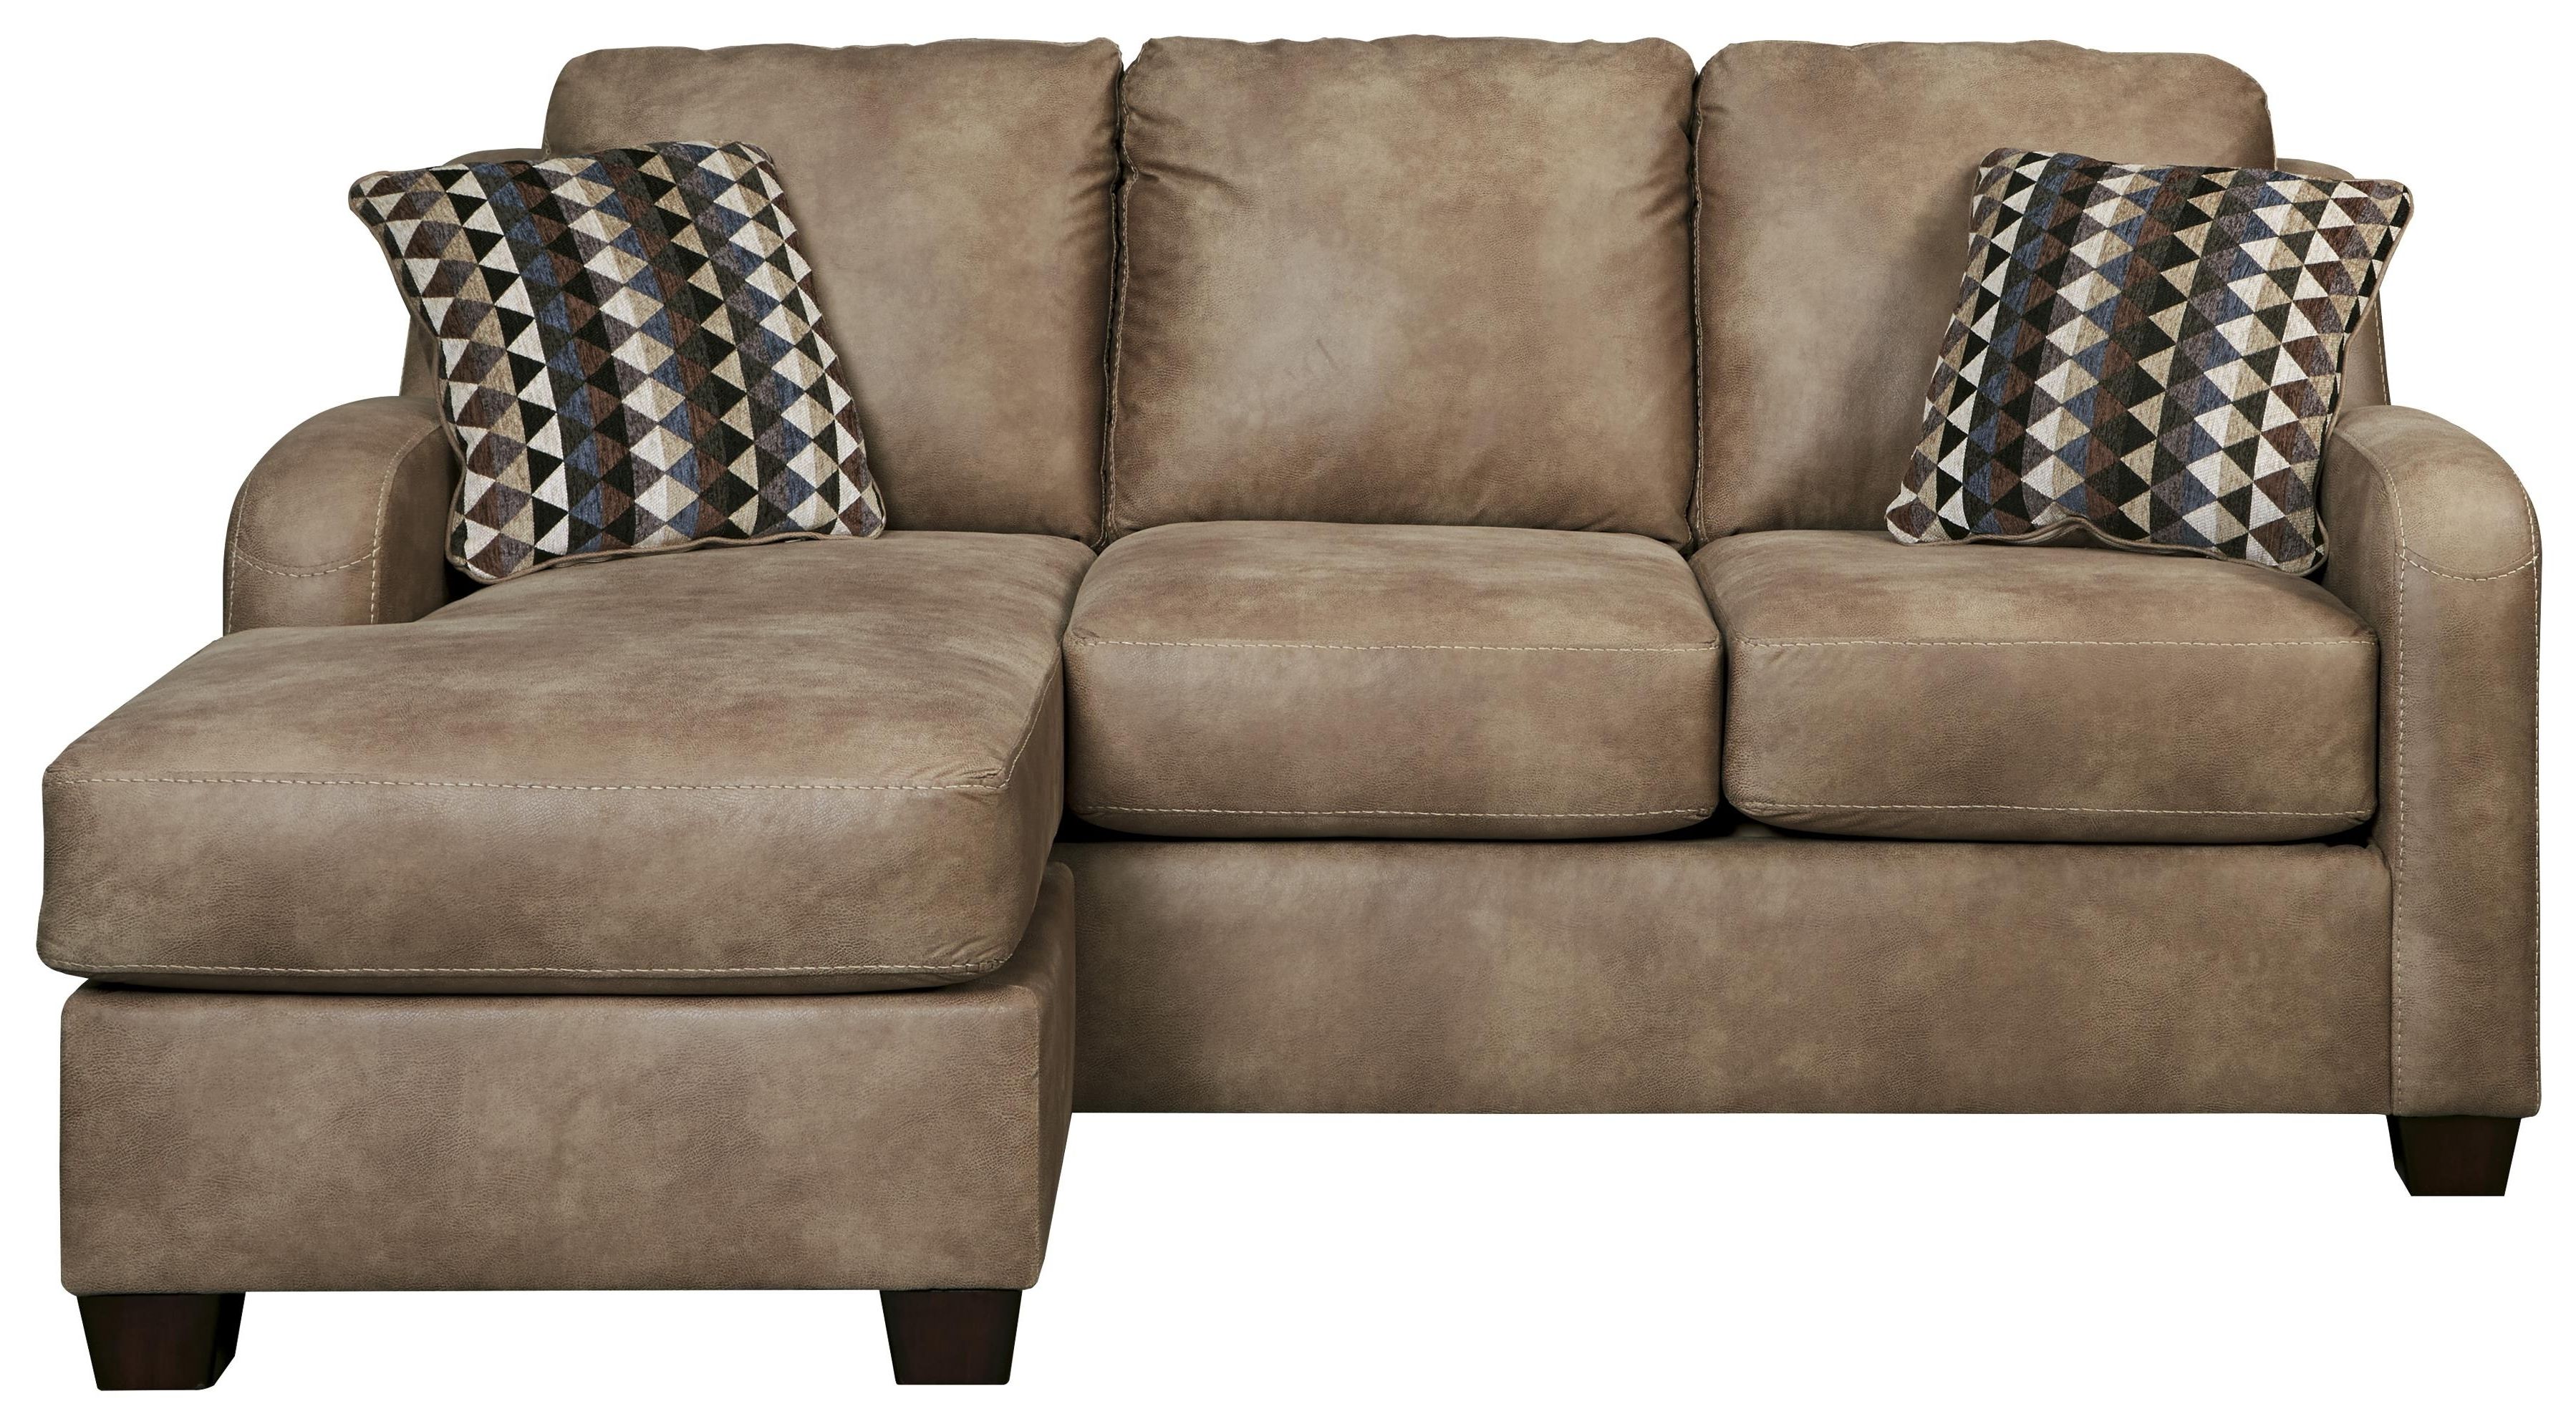 Contemporary Faux Leather Sofa Chaisebenchcraft 